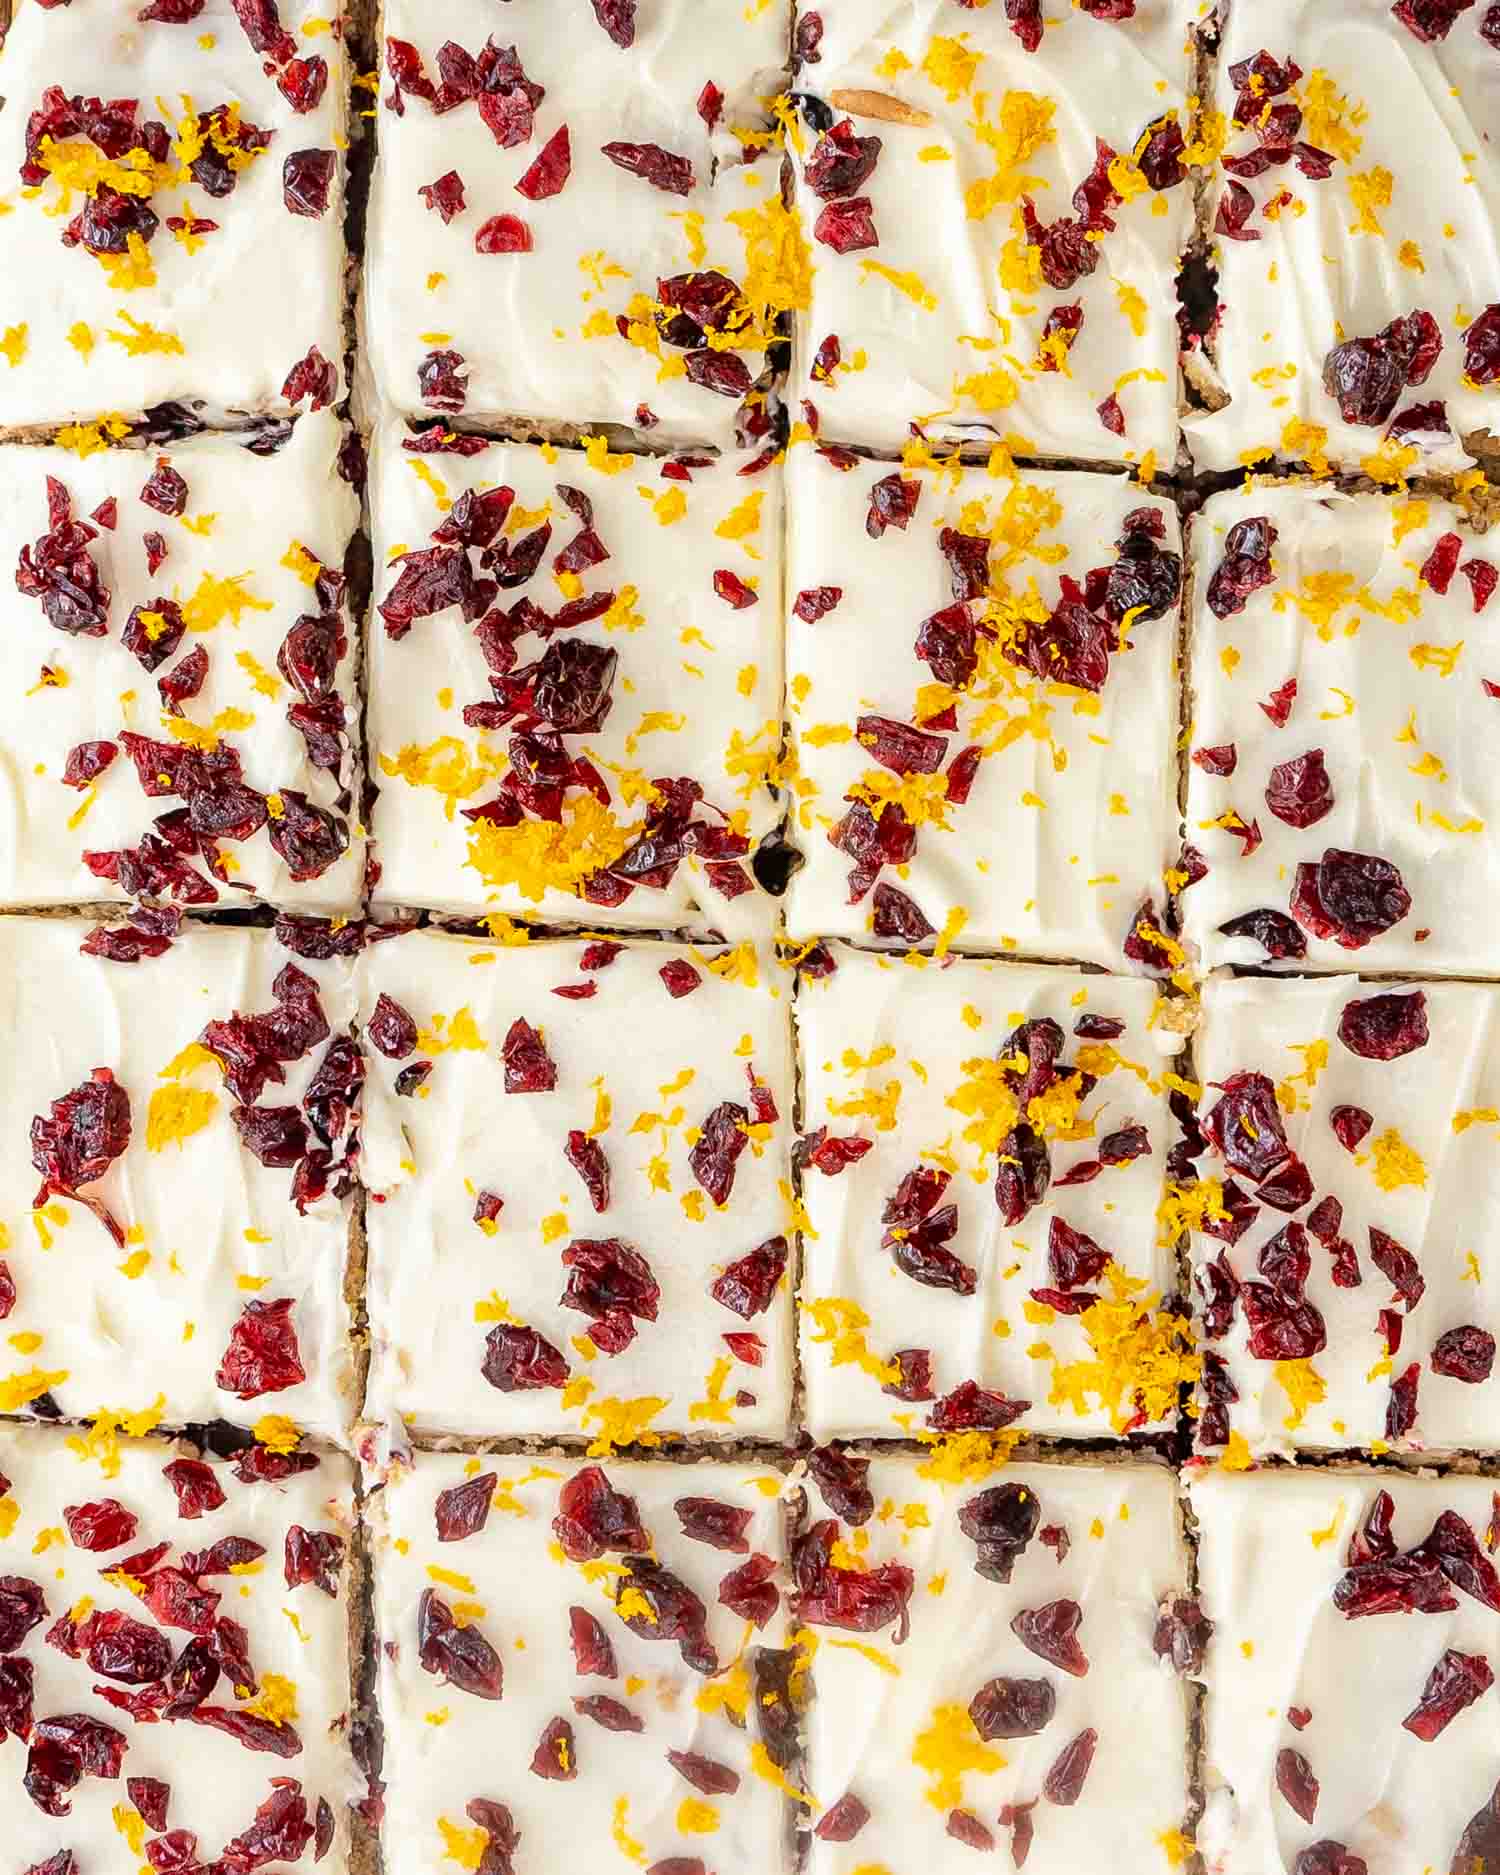 cranberry bars on a cutting board cut into squares and topped with dried cranberries and orange zest.